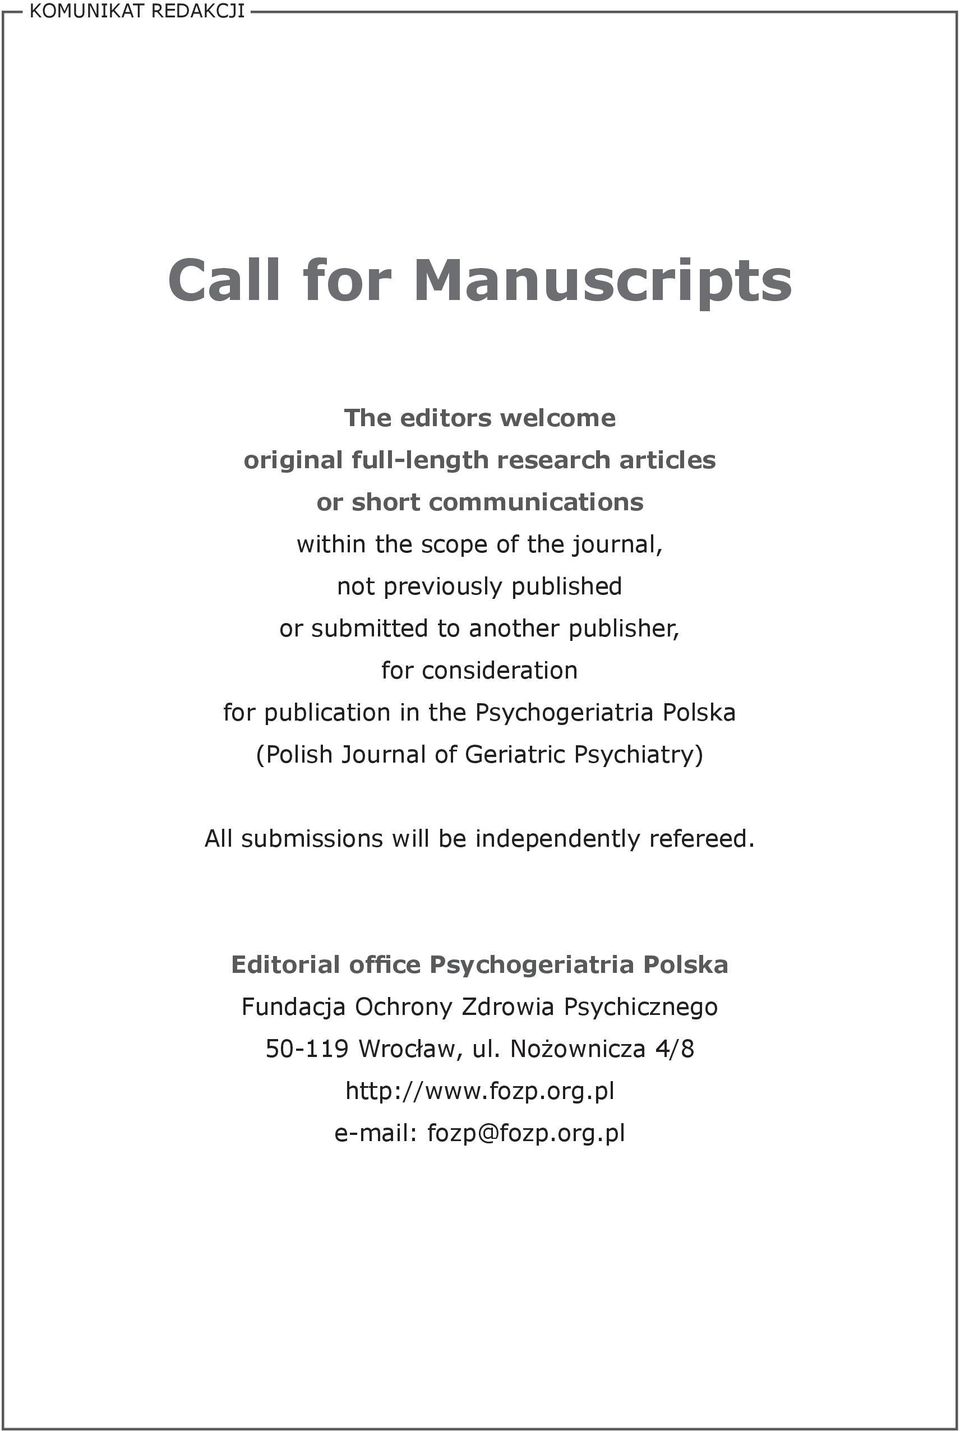 Psychogeriatria Polska (Polish Journal of Geriatric Psychiatry) All submissions will be independently refereed.